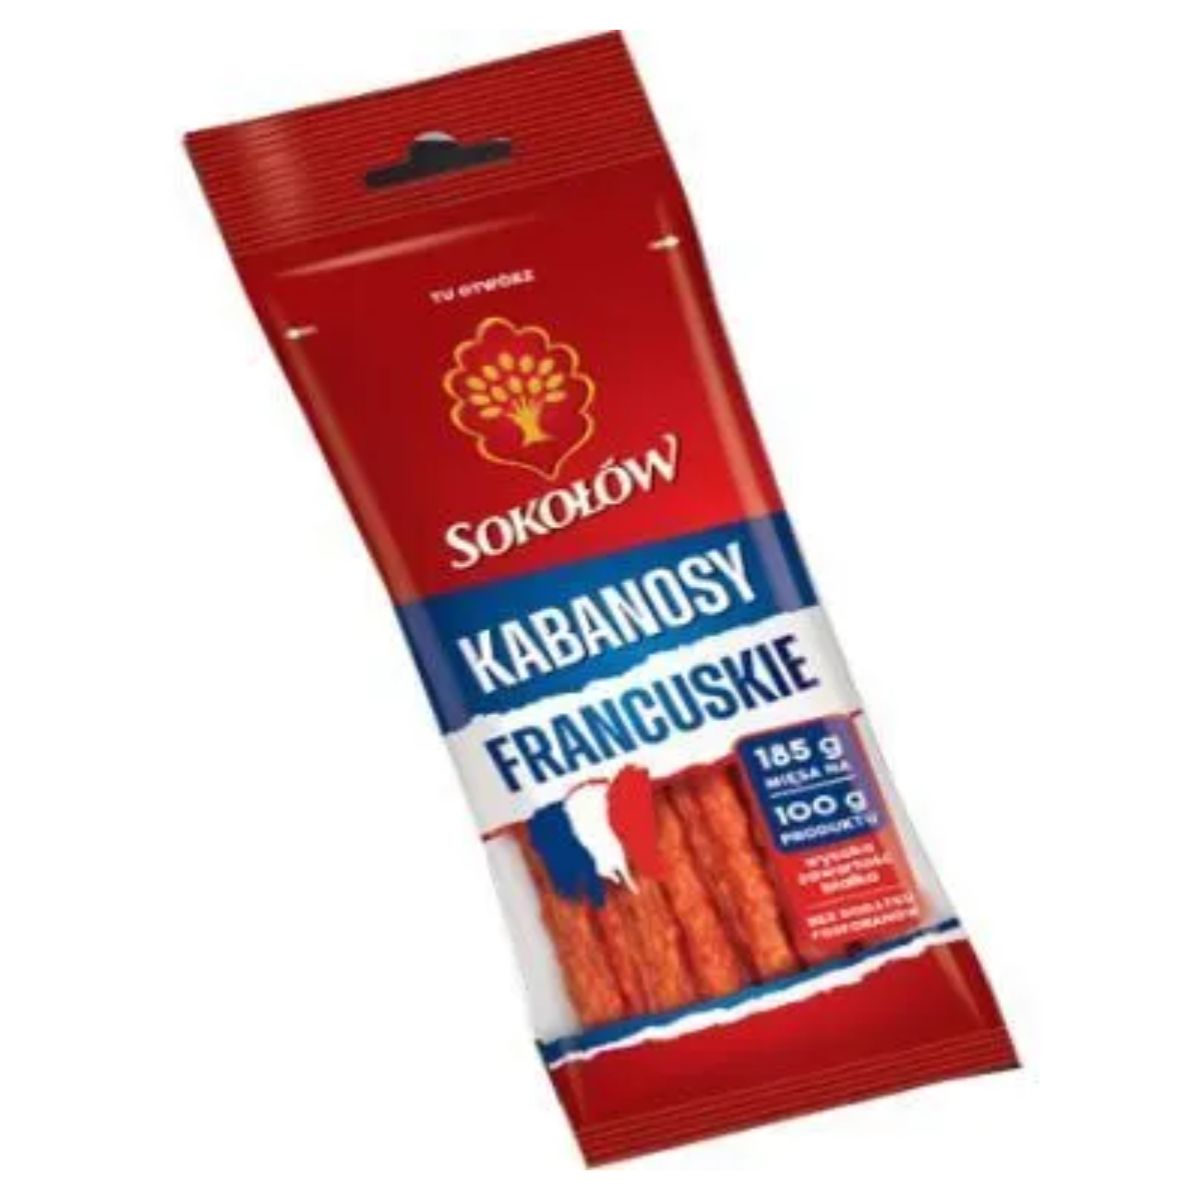 A package of Sokolow French Kabanos dog treats.